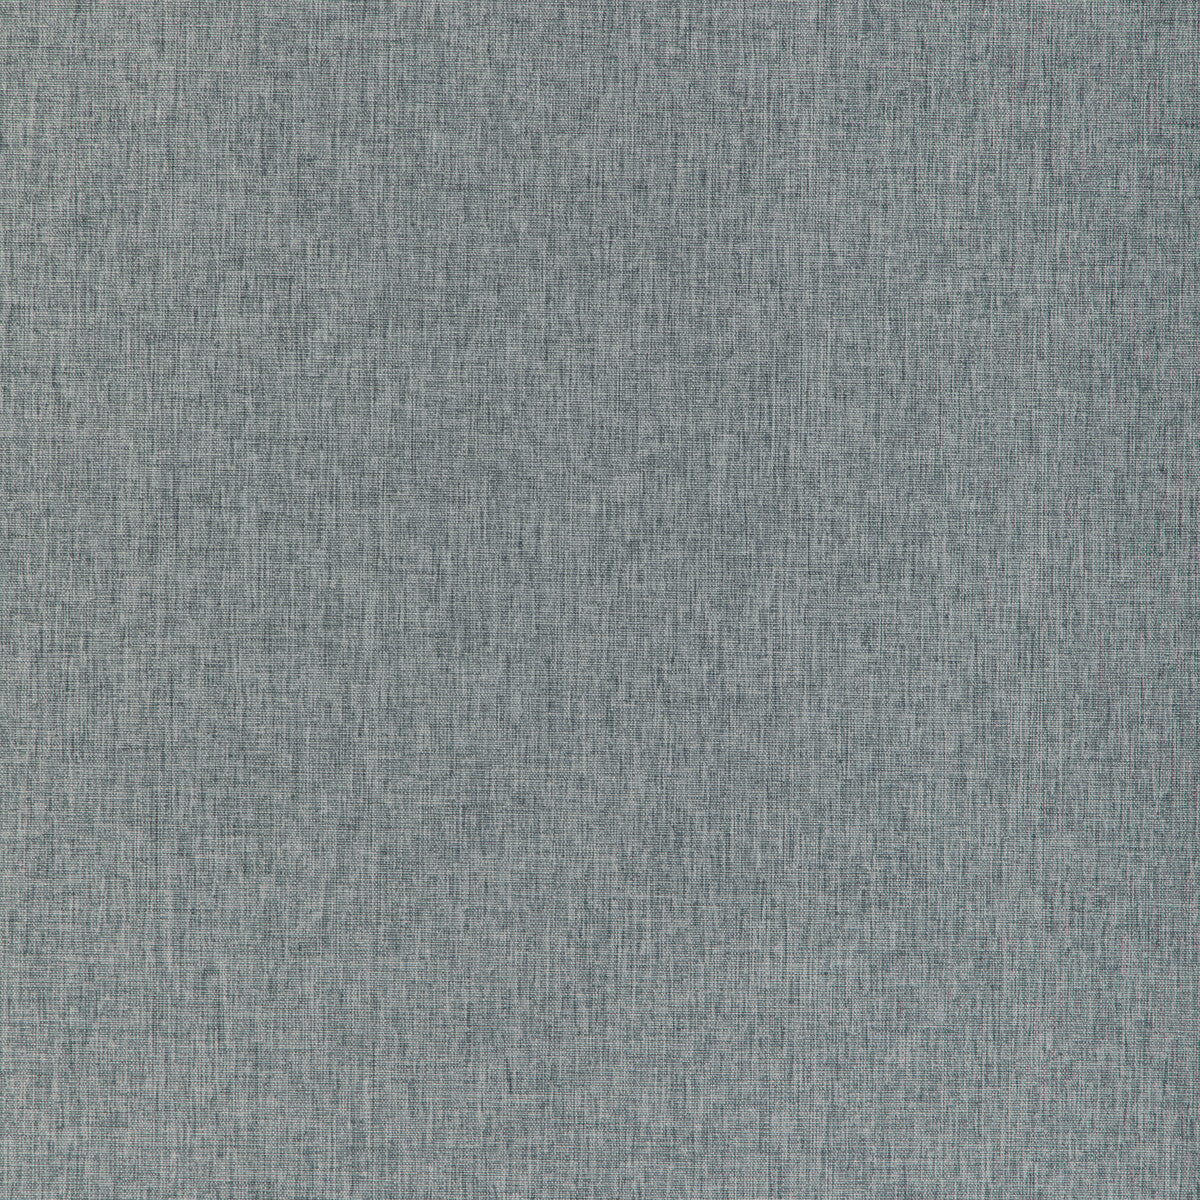 Kravet Contract fabric in 90001-1101 color - pattern 90001.1101.0 - by Kravet Contract in the Fr Window Blackout Drapery III collection